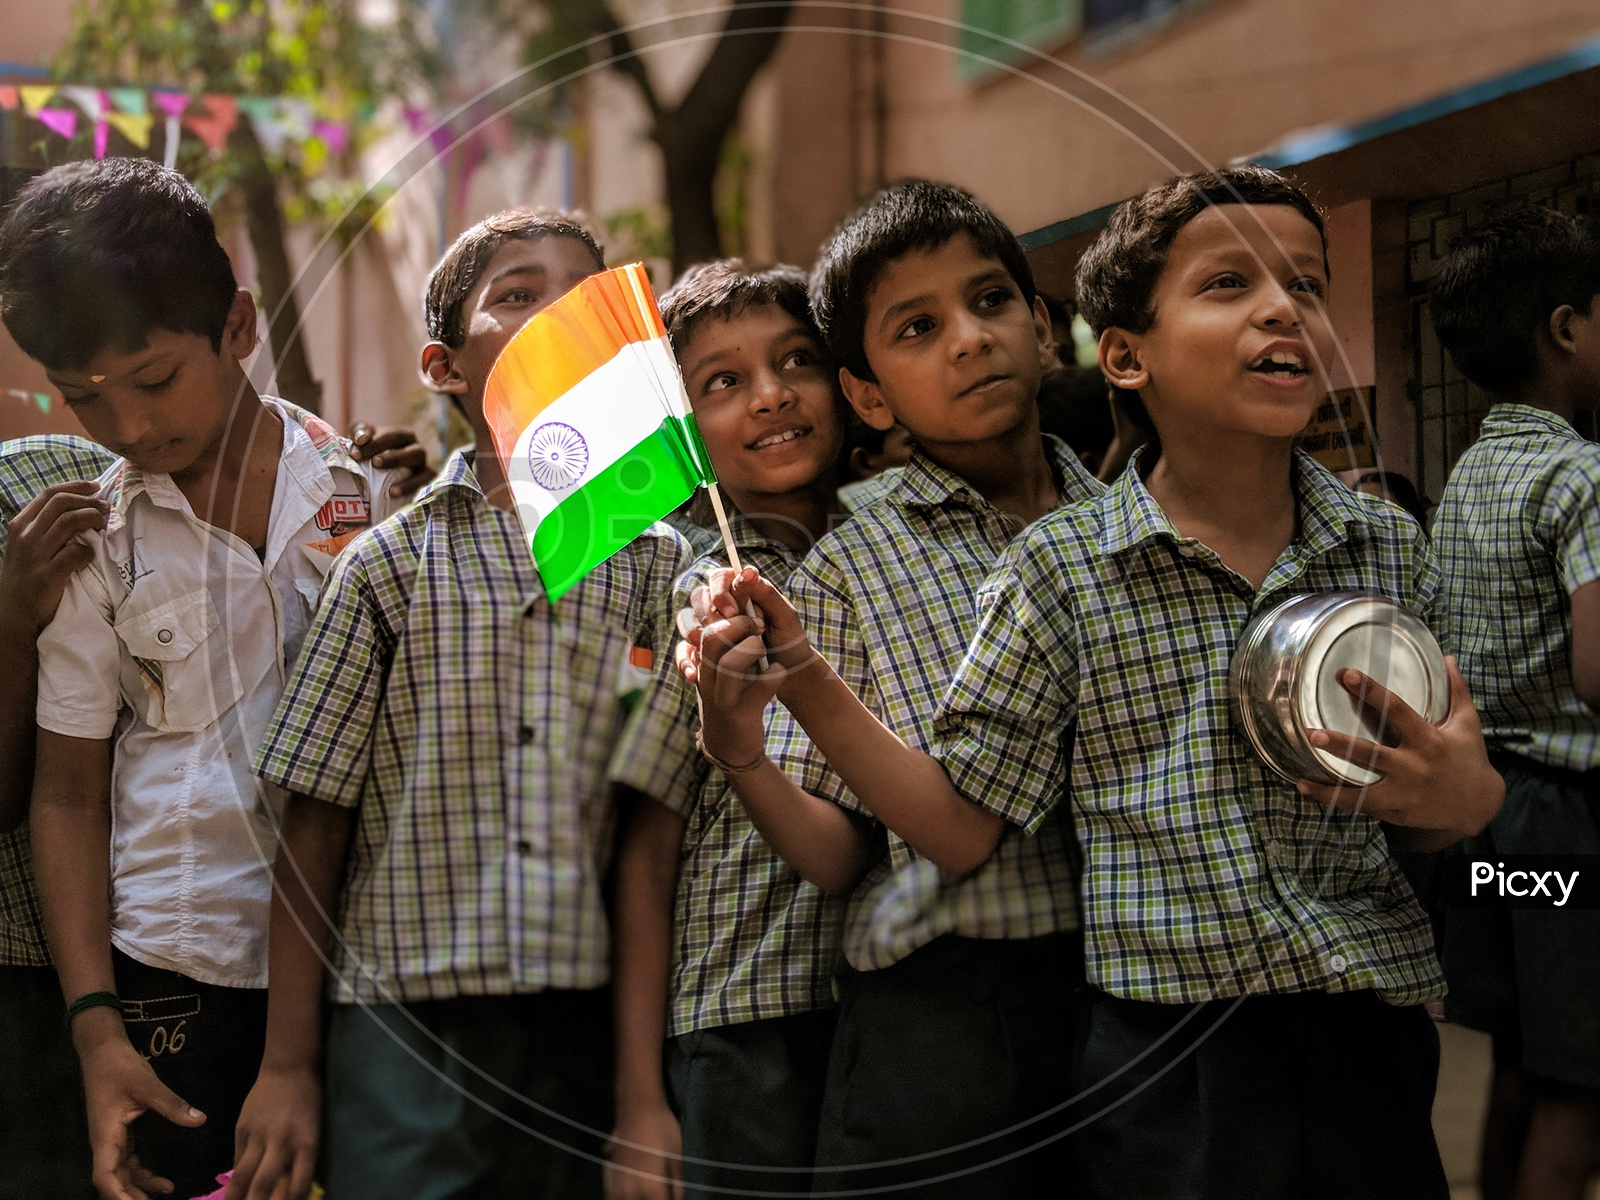 This was one fine day in Chennai government school. Childrens are holding the flag with spirit of India. Like the way this shot happened